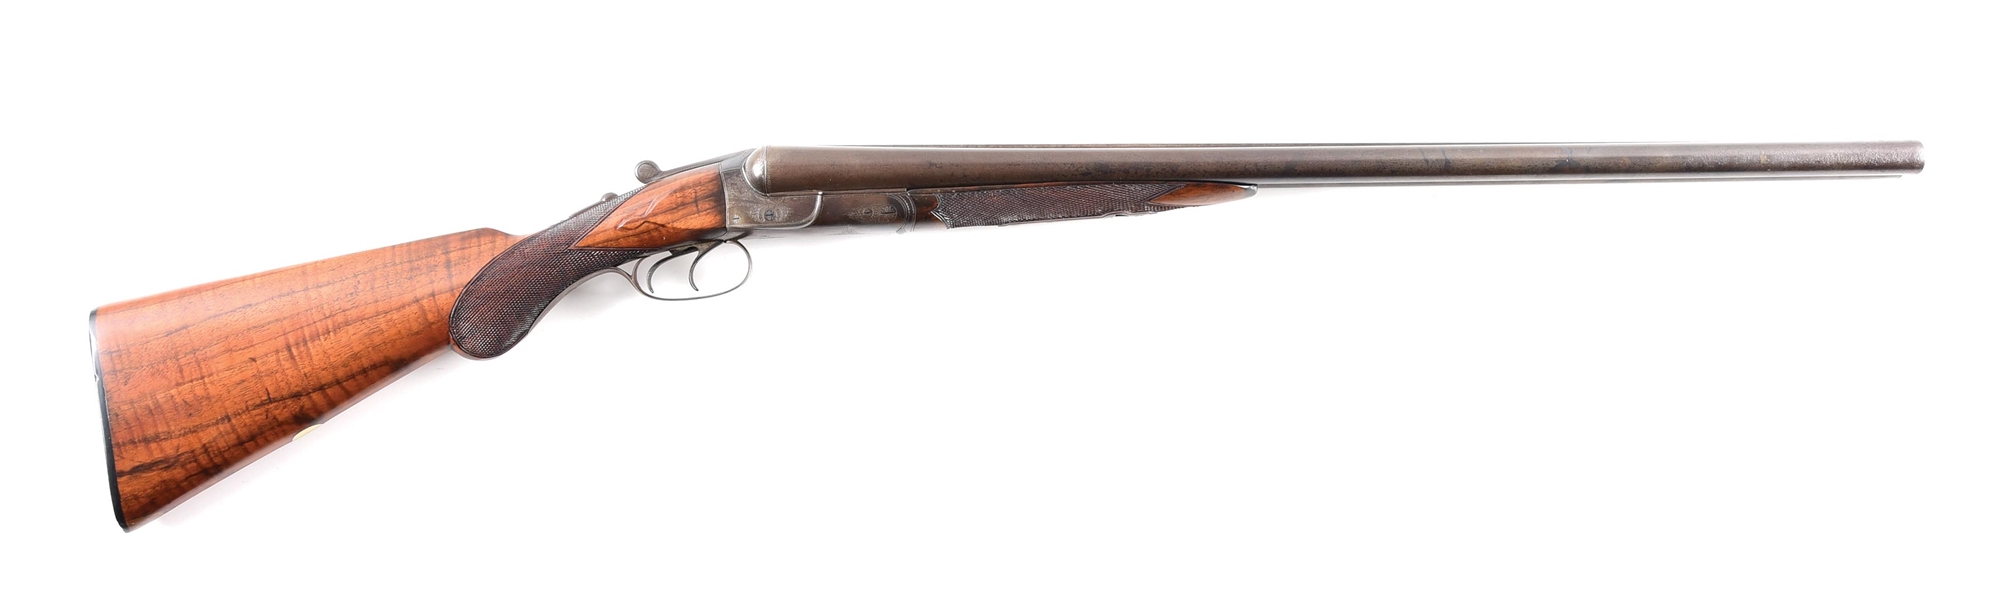 (A) CHARLES DALY SIDE BY SIDE SHOTGUN.